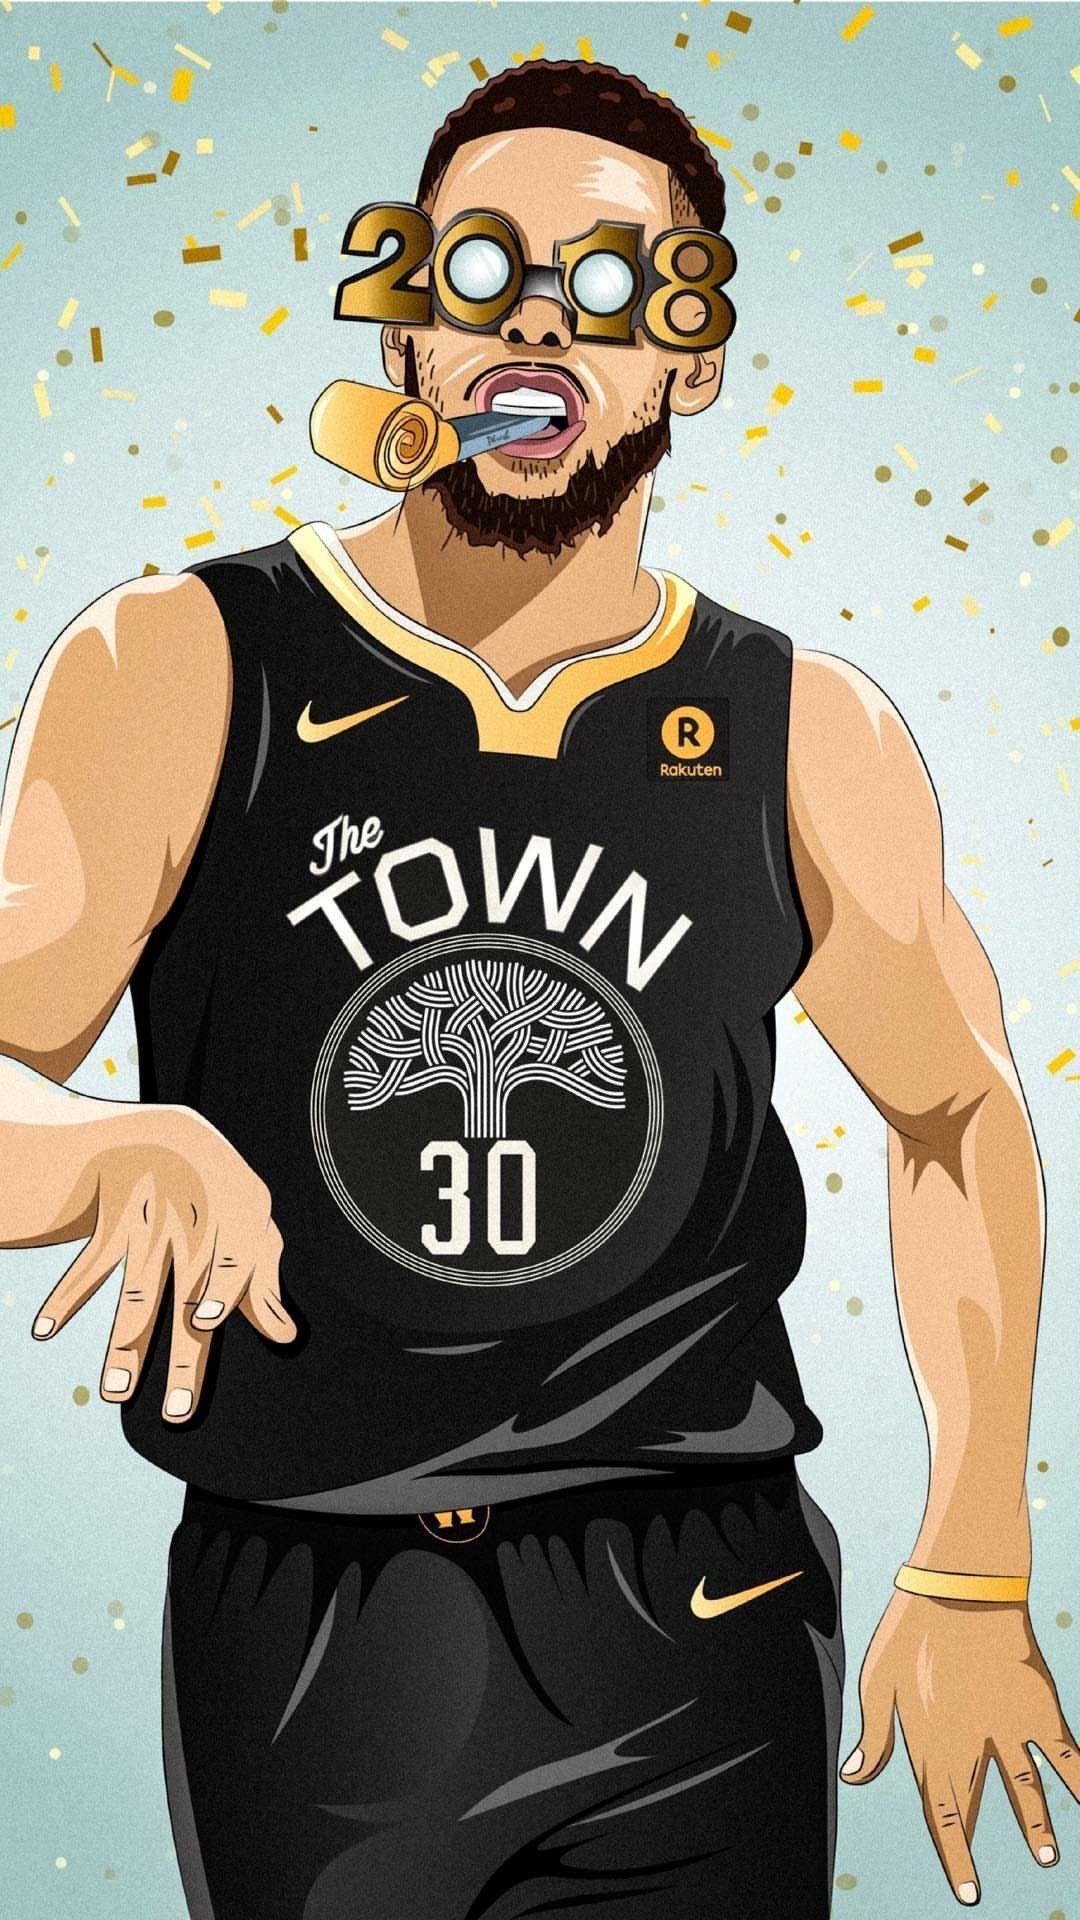 Stephen Curry 2018 New Year Wallpaper. BASKETBALL